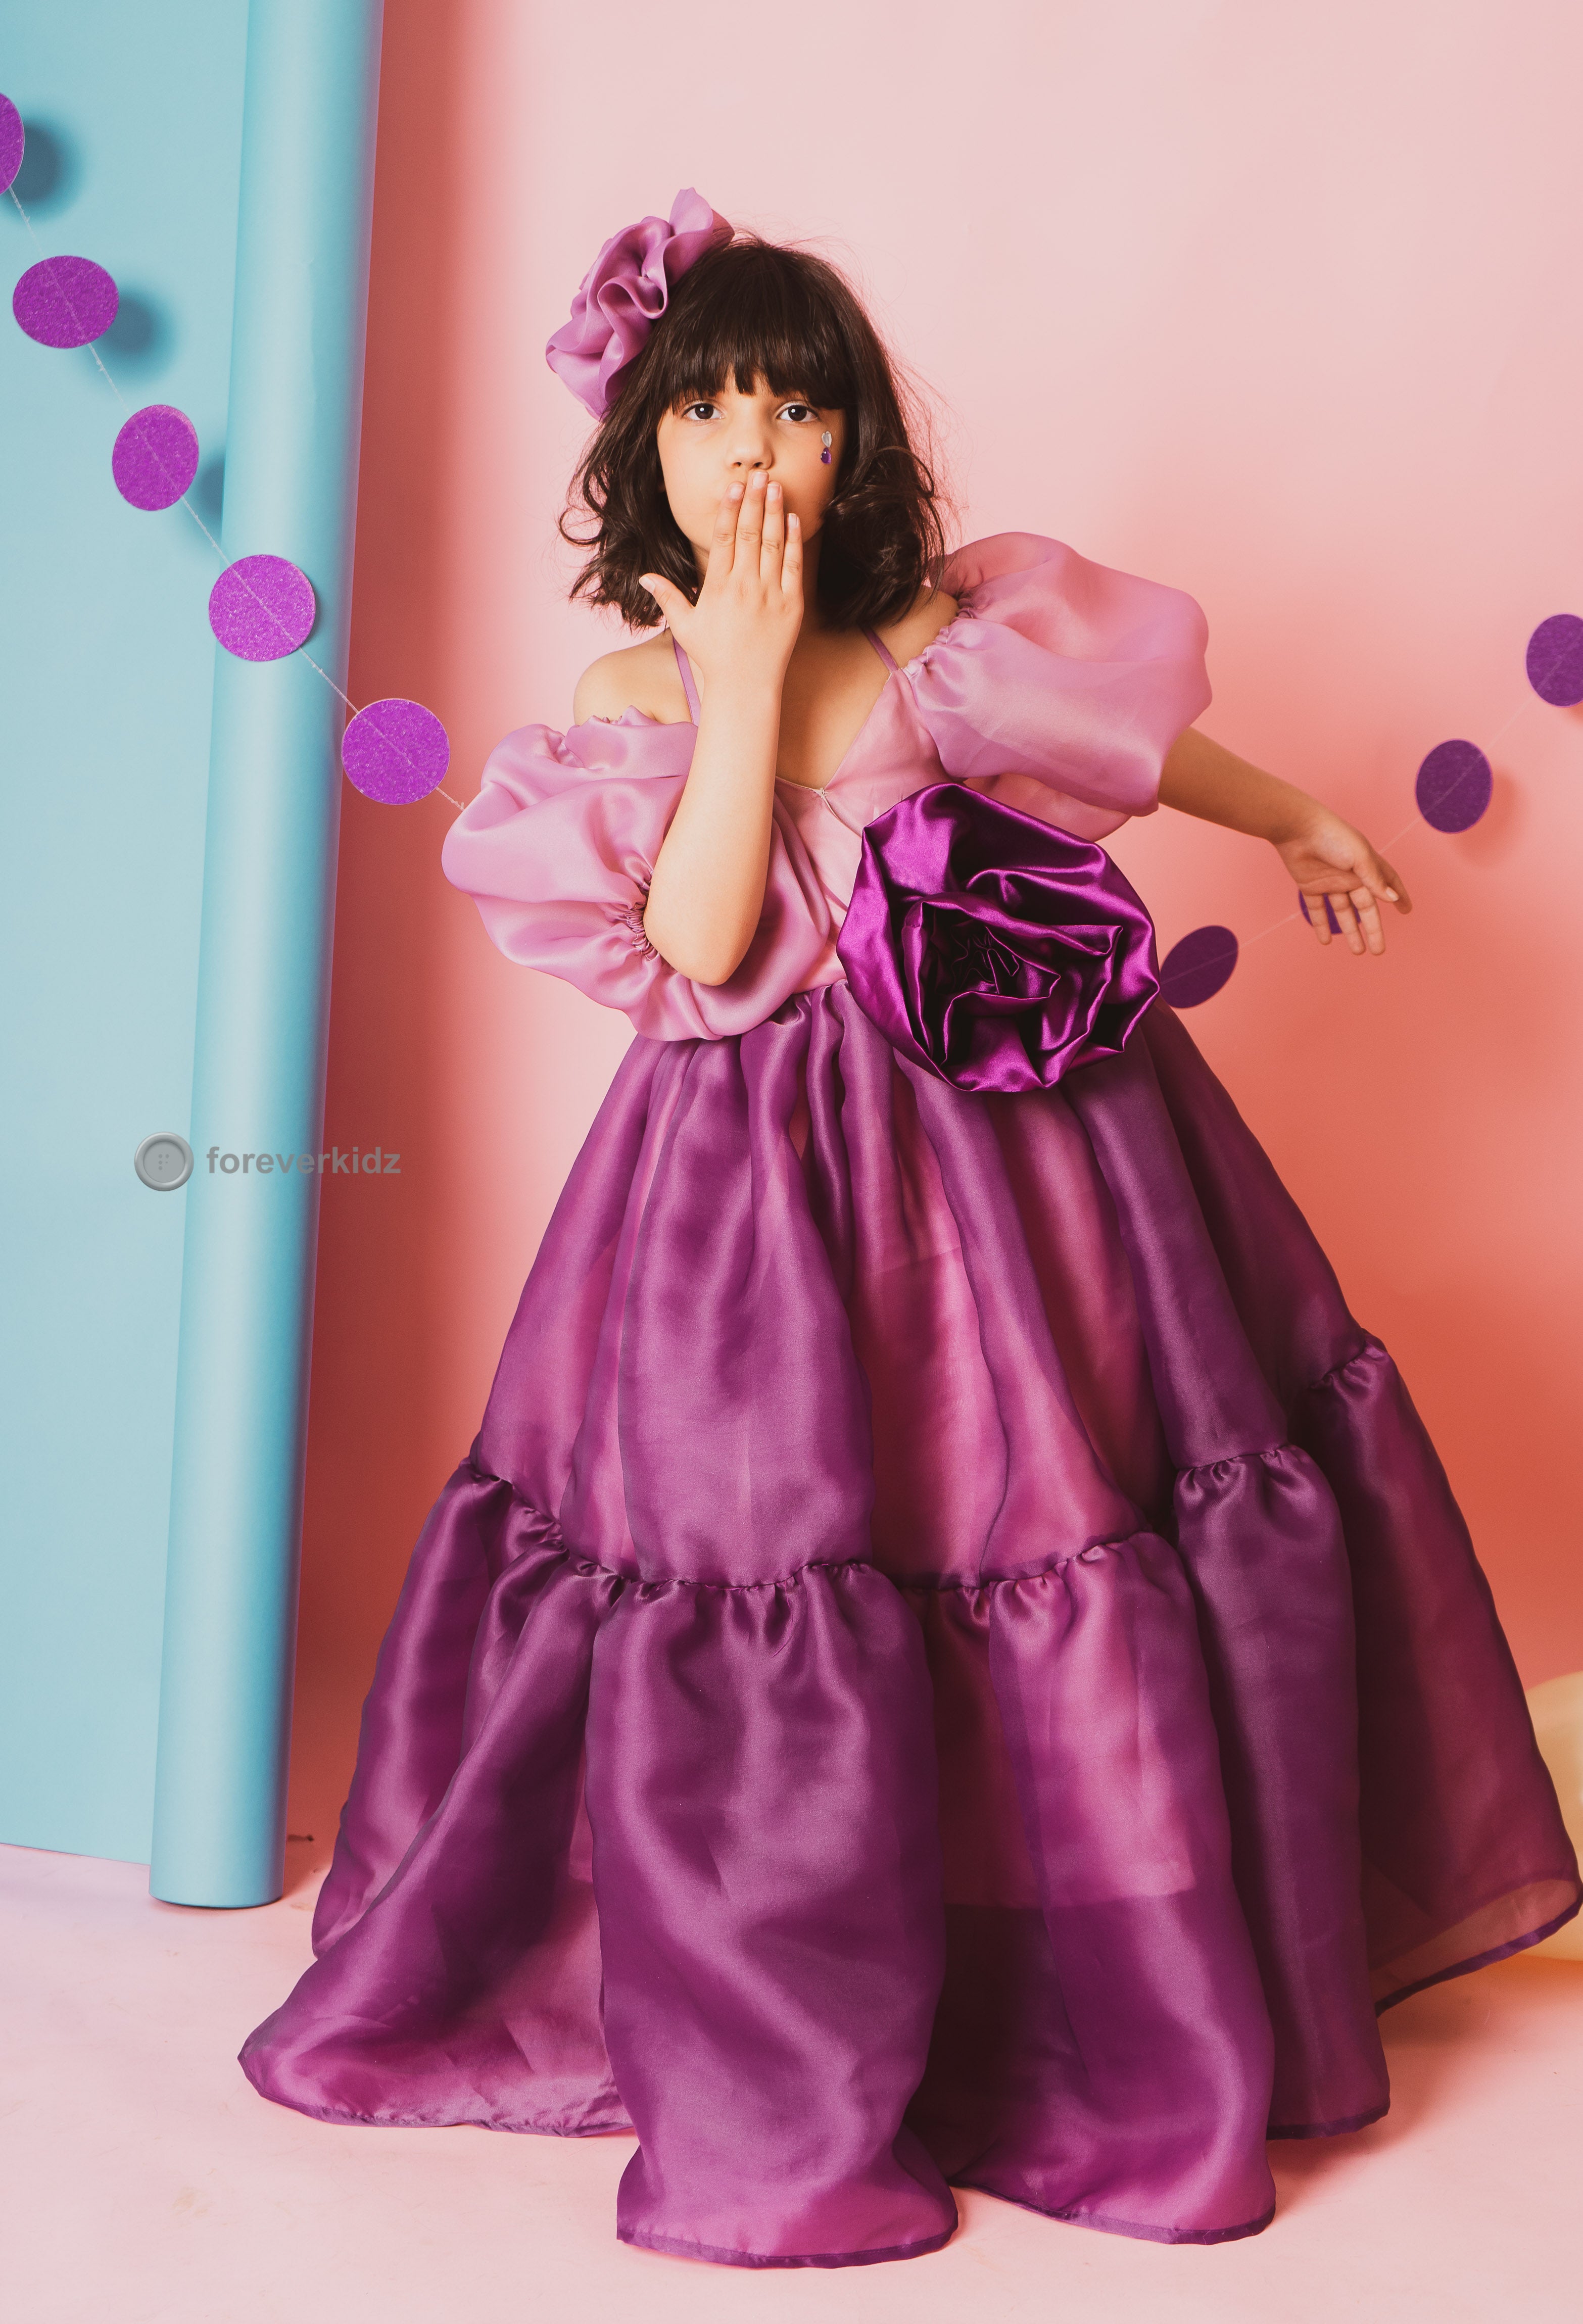 Kids party gown